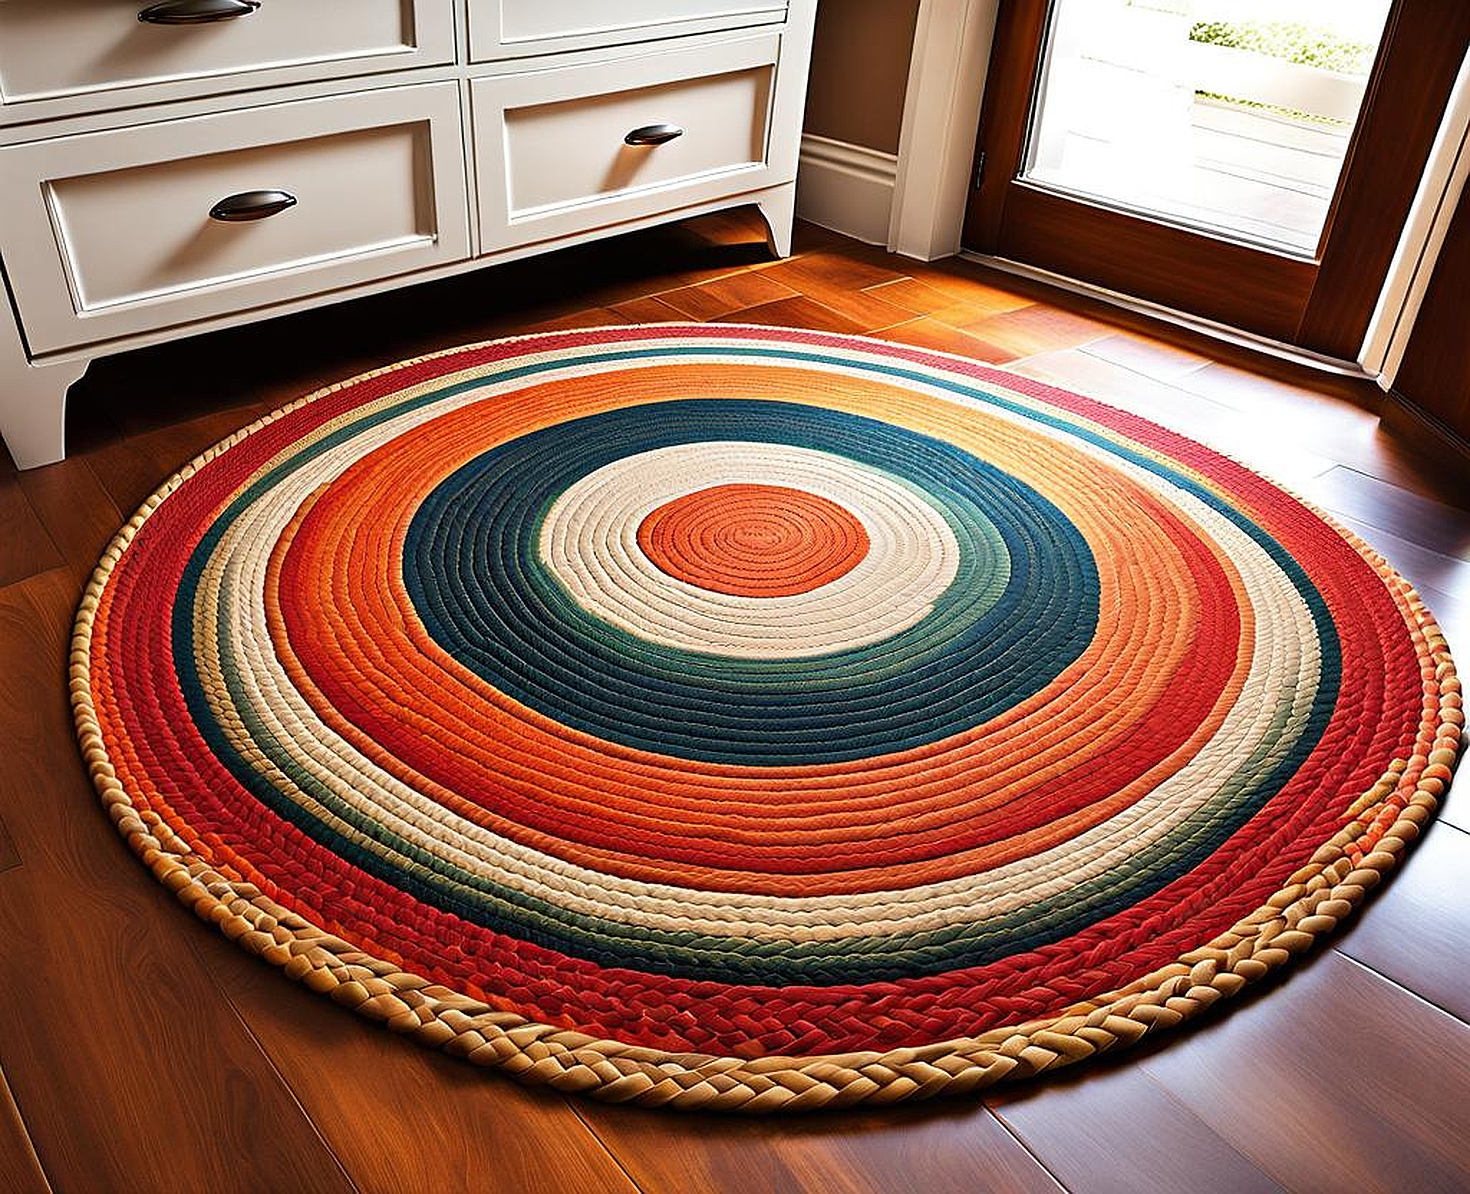 Round Braided Rugs for Kitchen Soft Furnishings